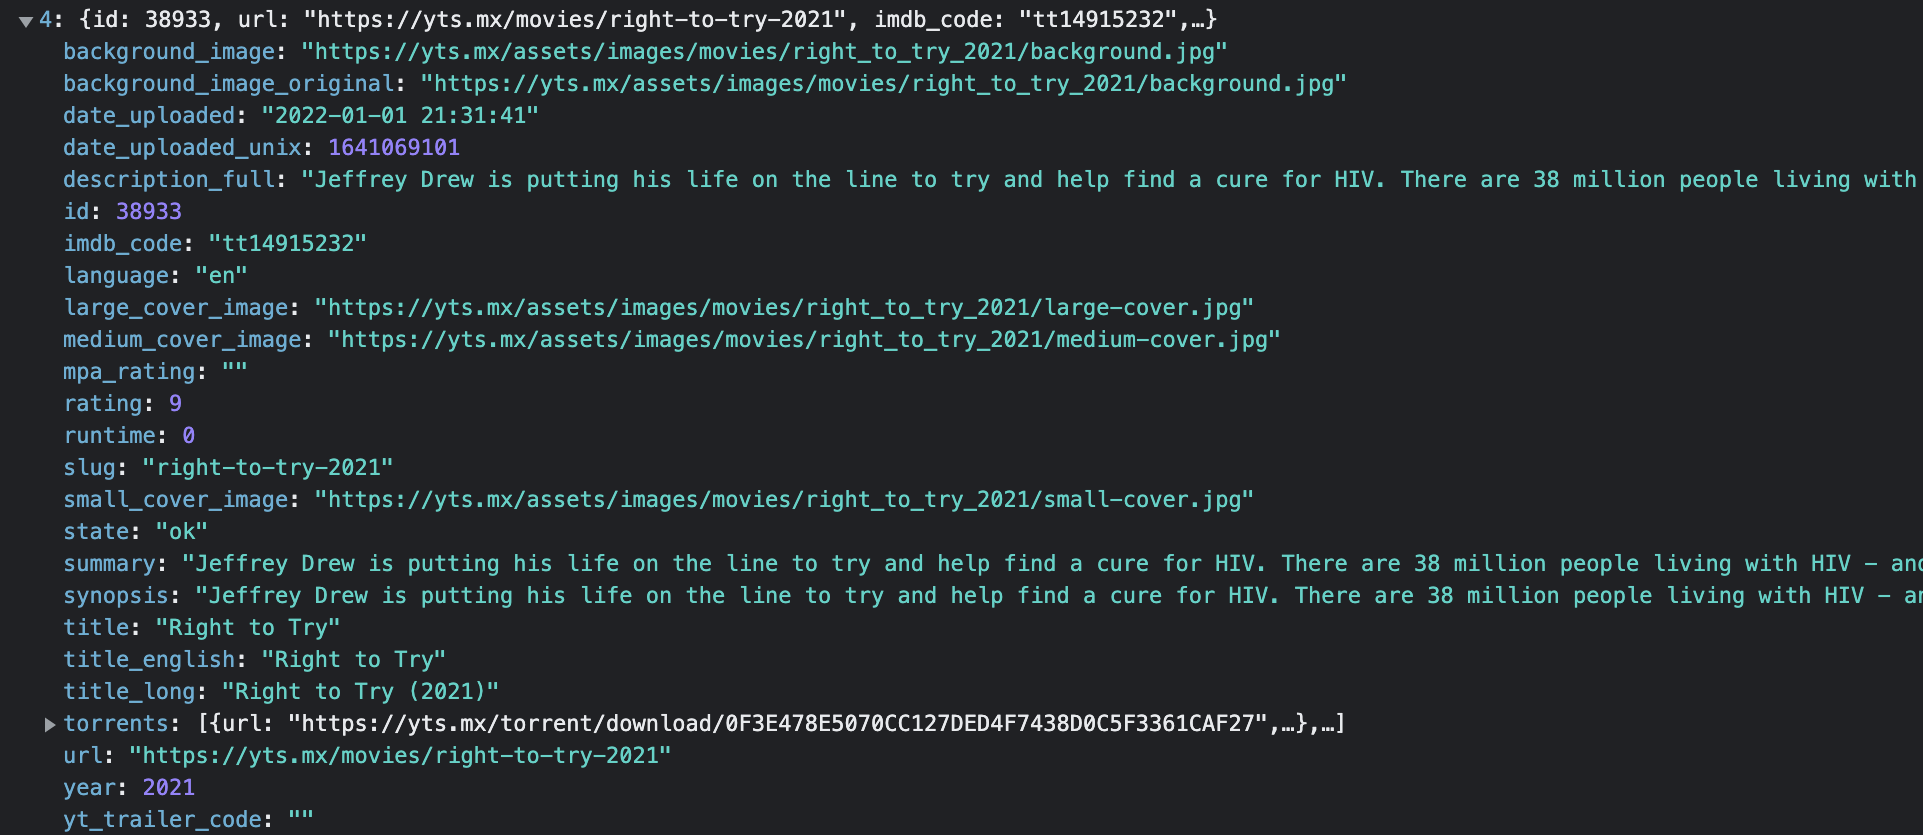 This is 4st element of the JSON data received from the MOVIE API